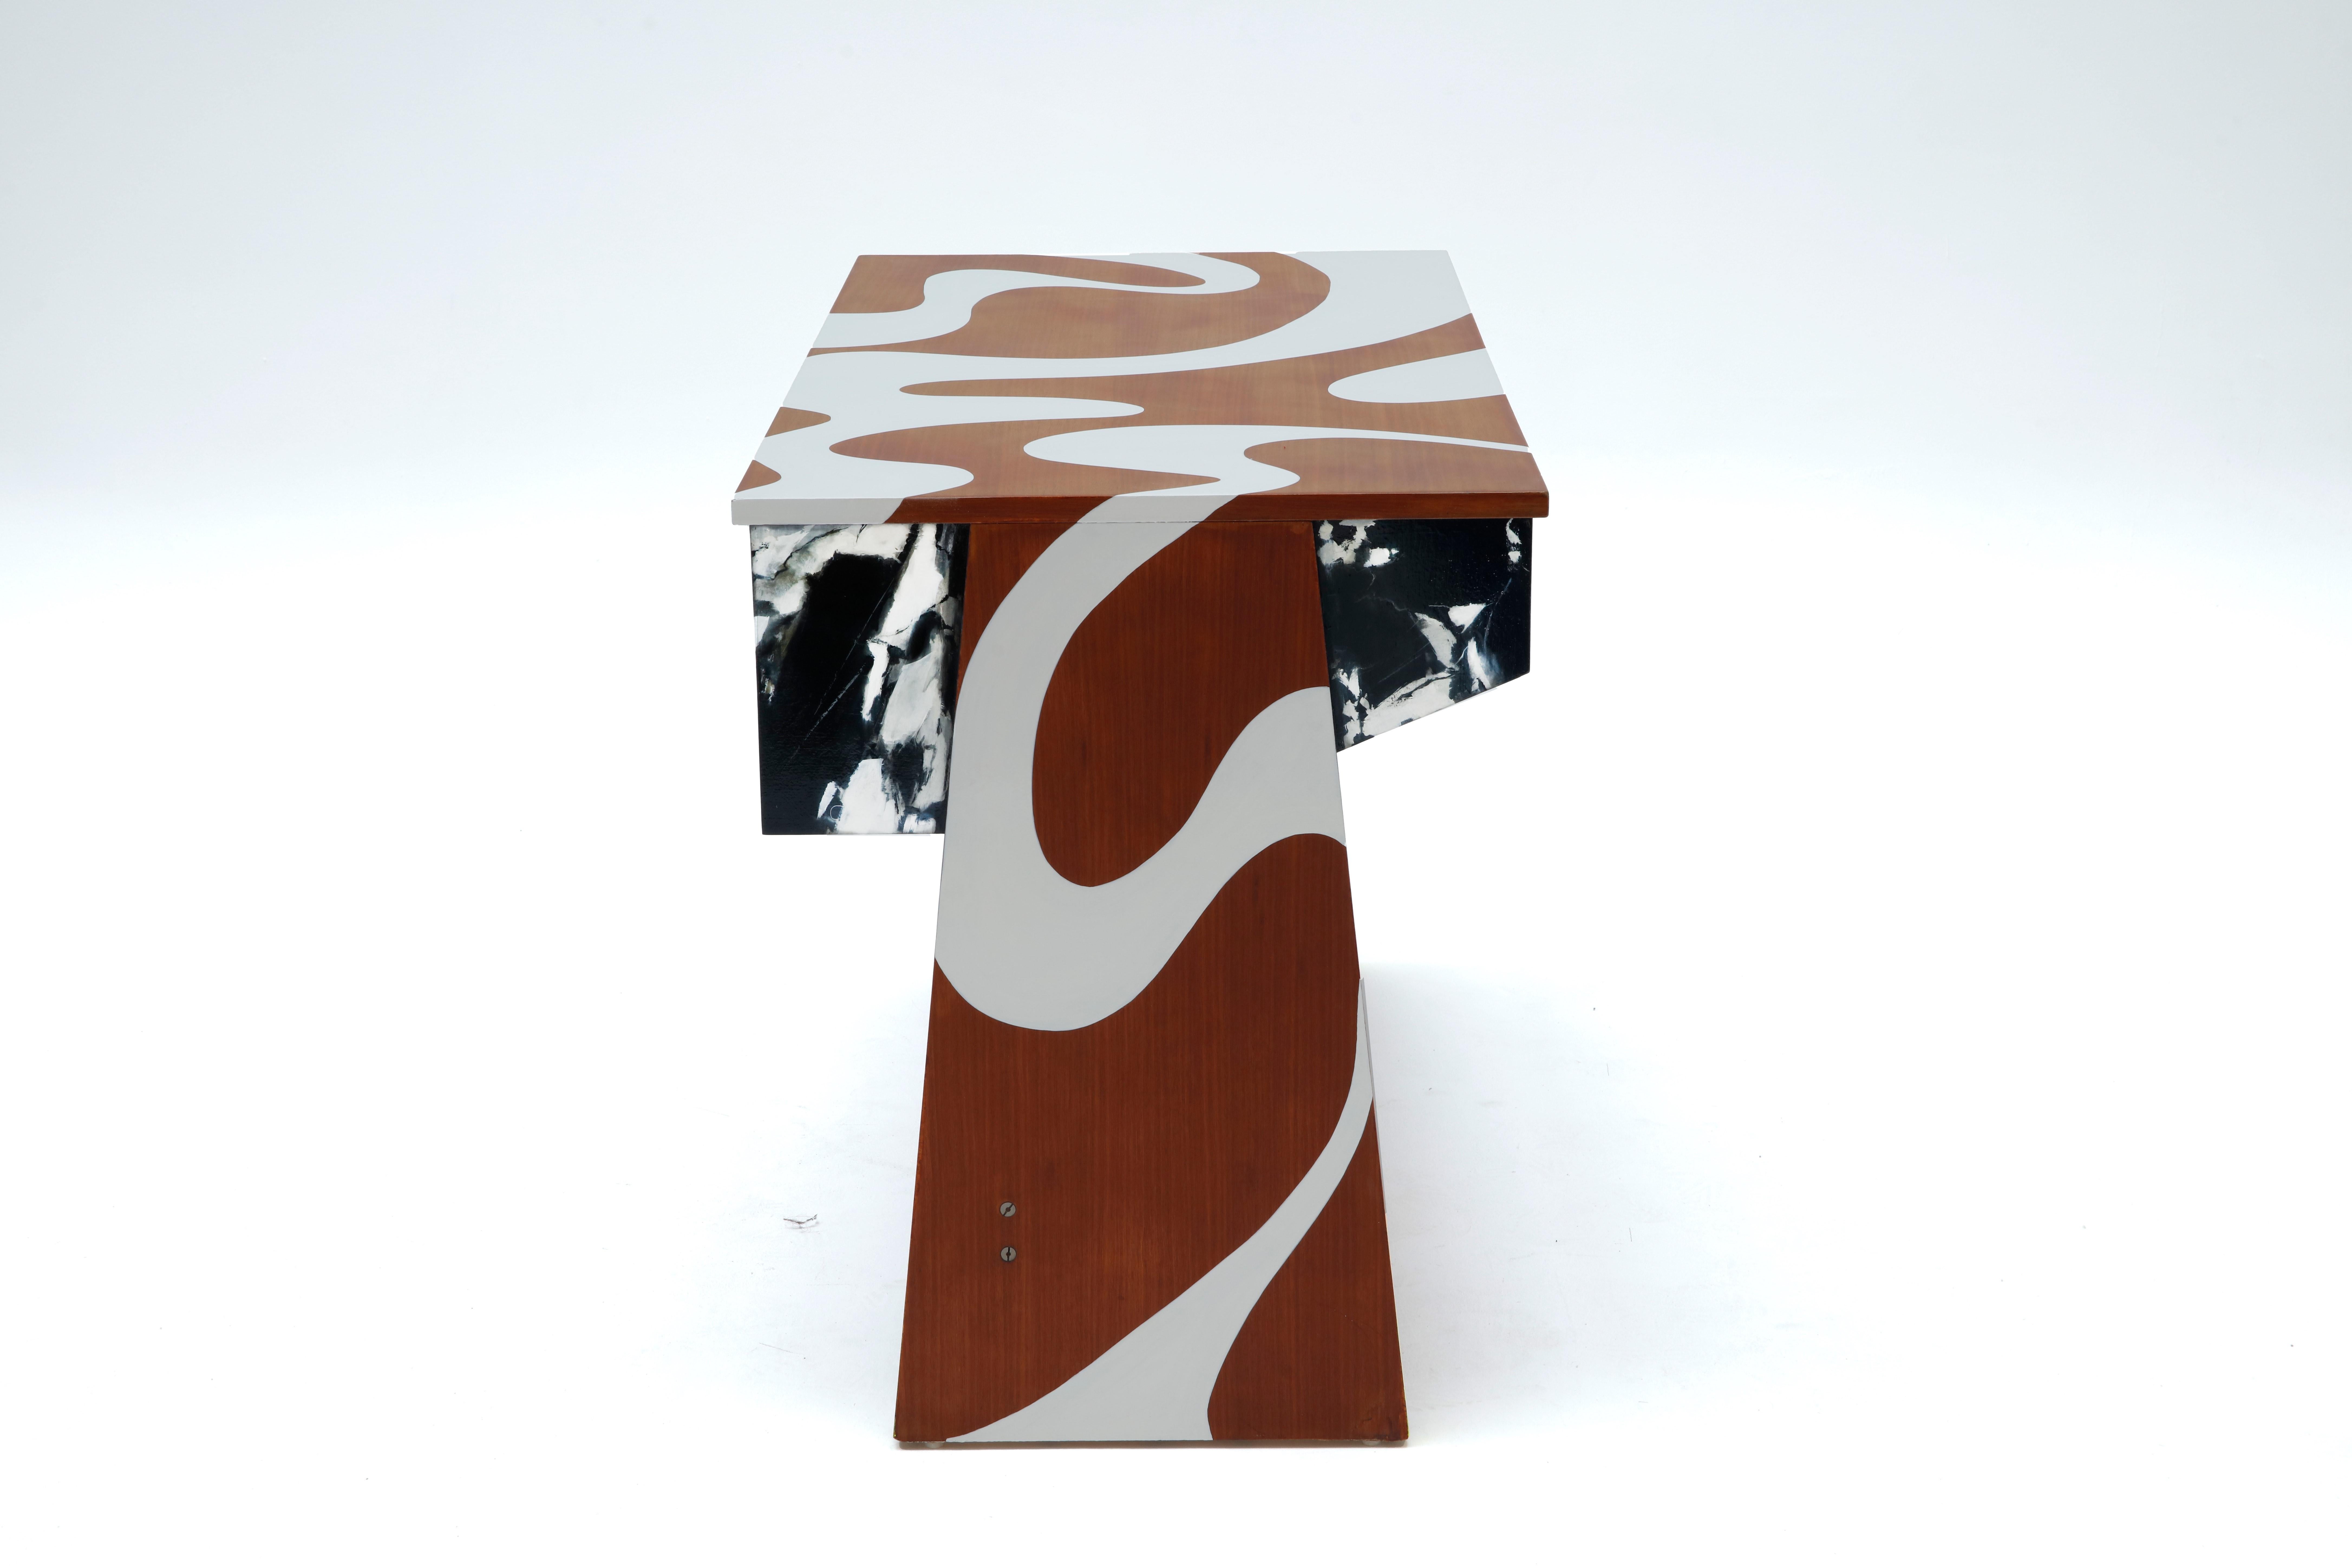 This desk is the first piece of our work, Polcha, we wanted to work the materials in trompe l'oeil and graphic forms to come, visually, destructure the original form, come to disrupt the reading of the lines. The marble gives a density that disturbs